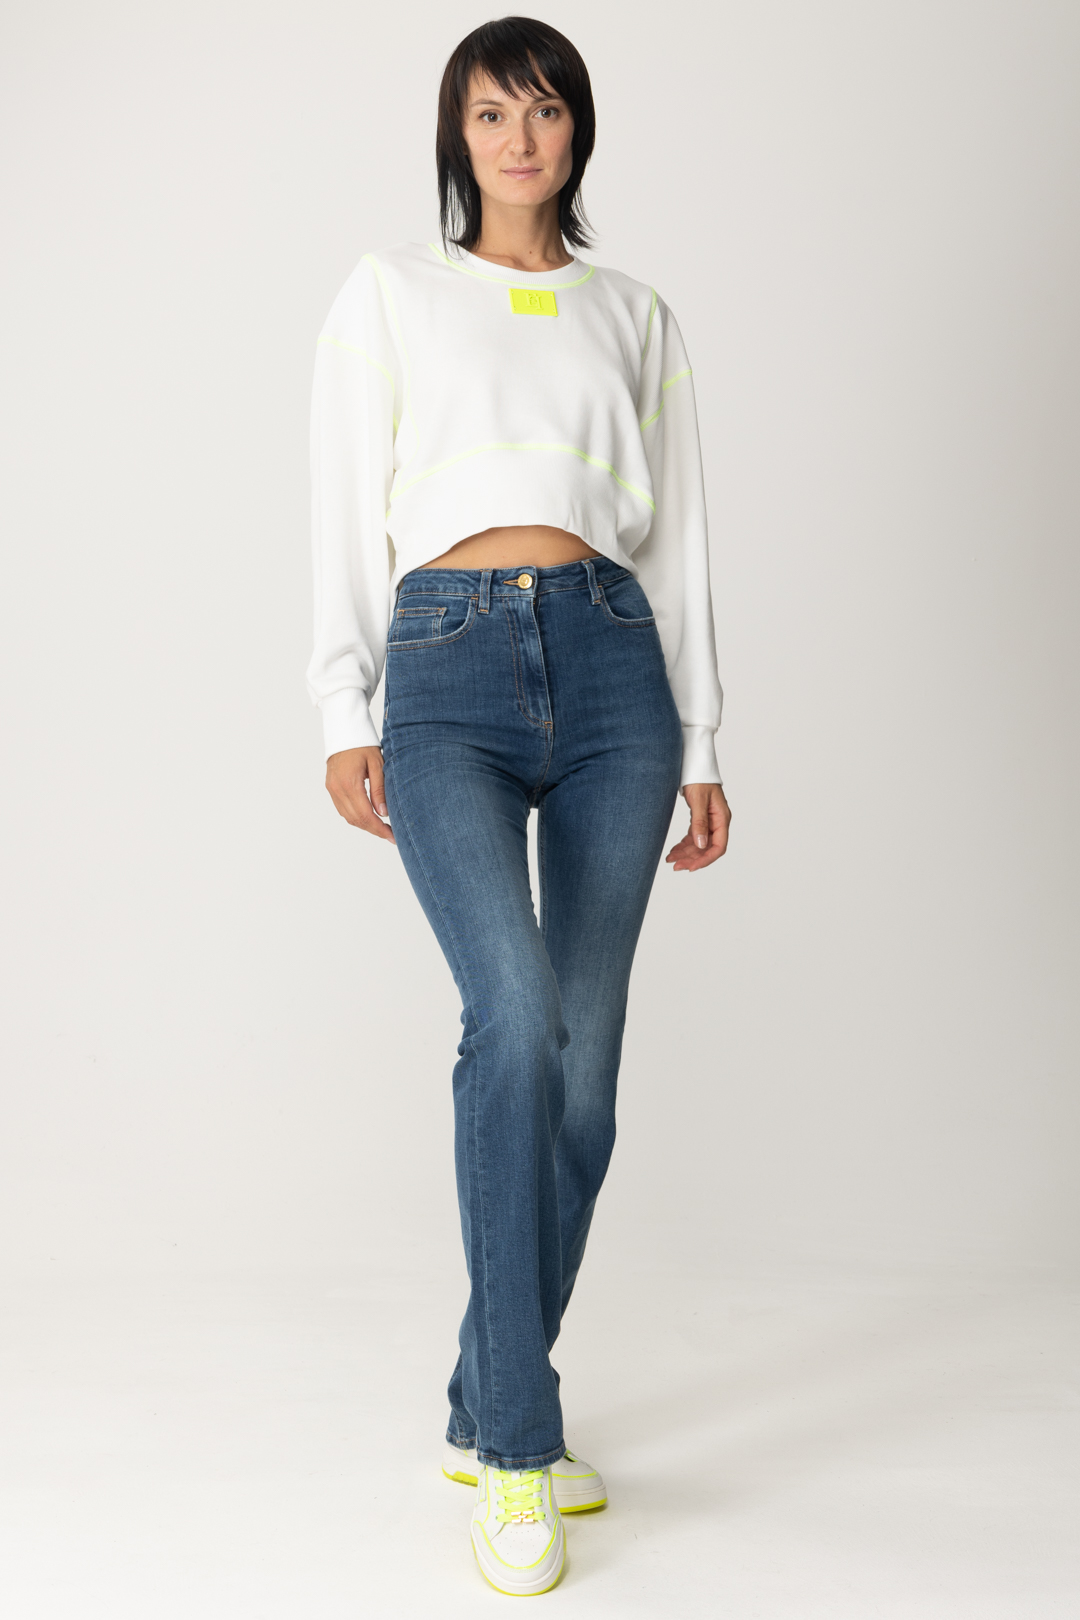 Preview: Elisabetta Franchi Cropped sweatshirt with fluo details Avorio